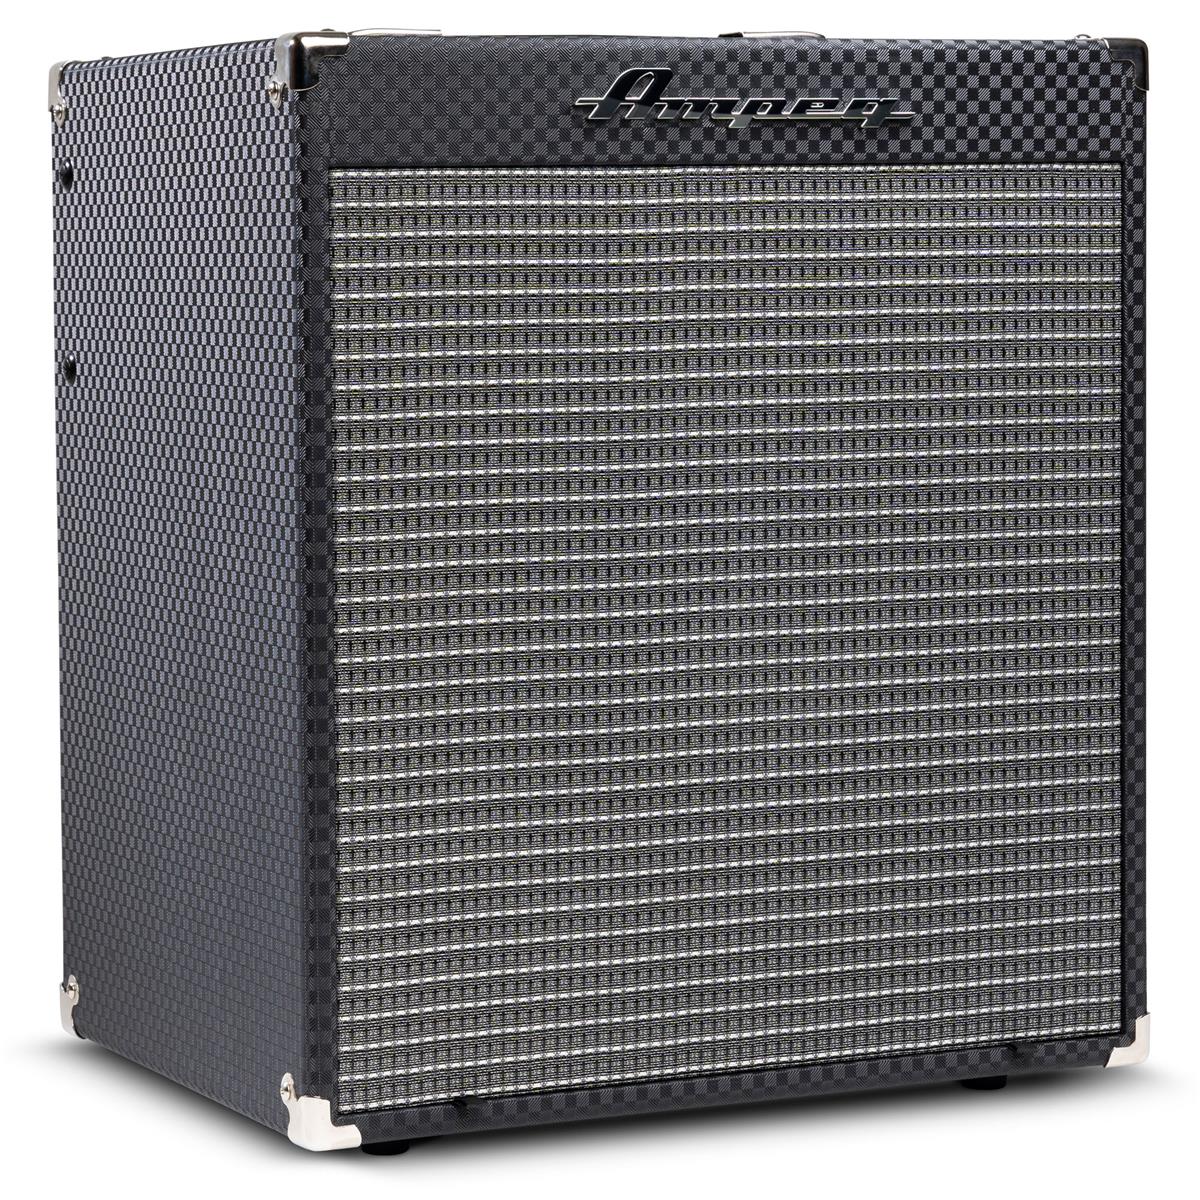 Picture of Ampeg RB-110-U 50 W Ampeg Rocket Bass Combo Bass Amplifier